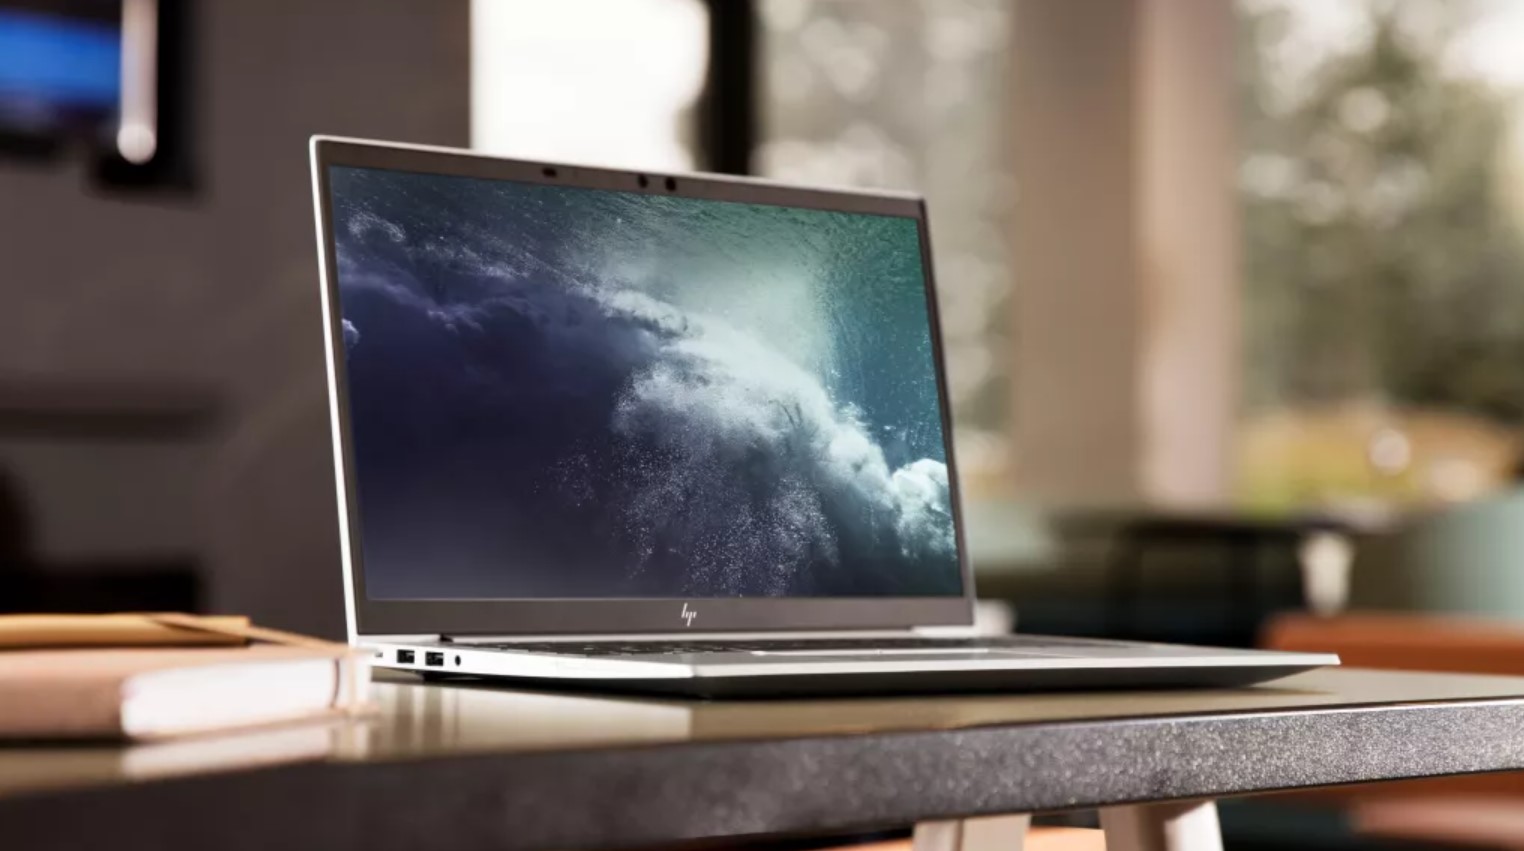 HP launches its lightest and thinnest ever business laptop - Elitebook